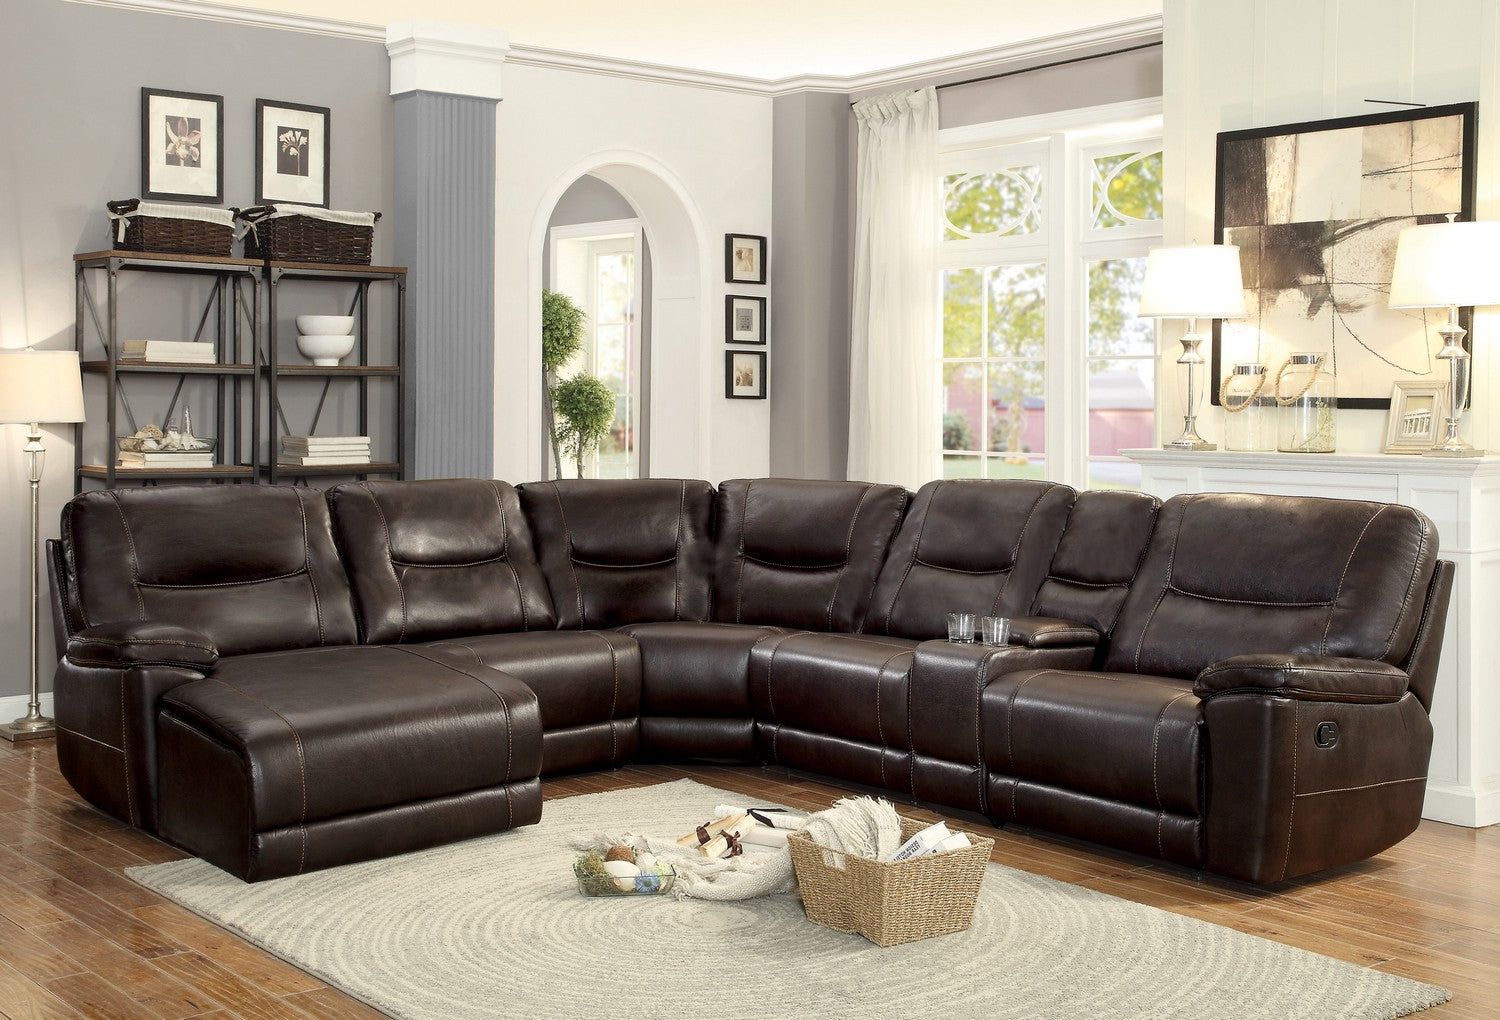 Camel Brown Leather 3 Piece Sectional Sofa Sierra – Having Removable Throughout 3 Piece Leather Sectional Sofa Sets (View 19 of 20)